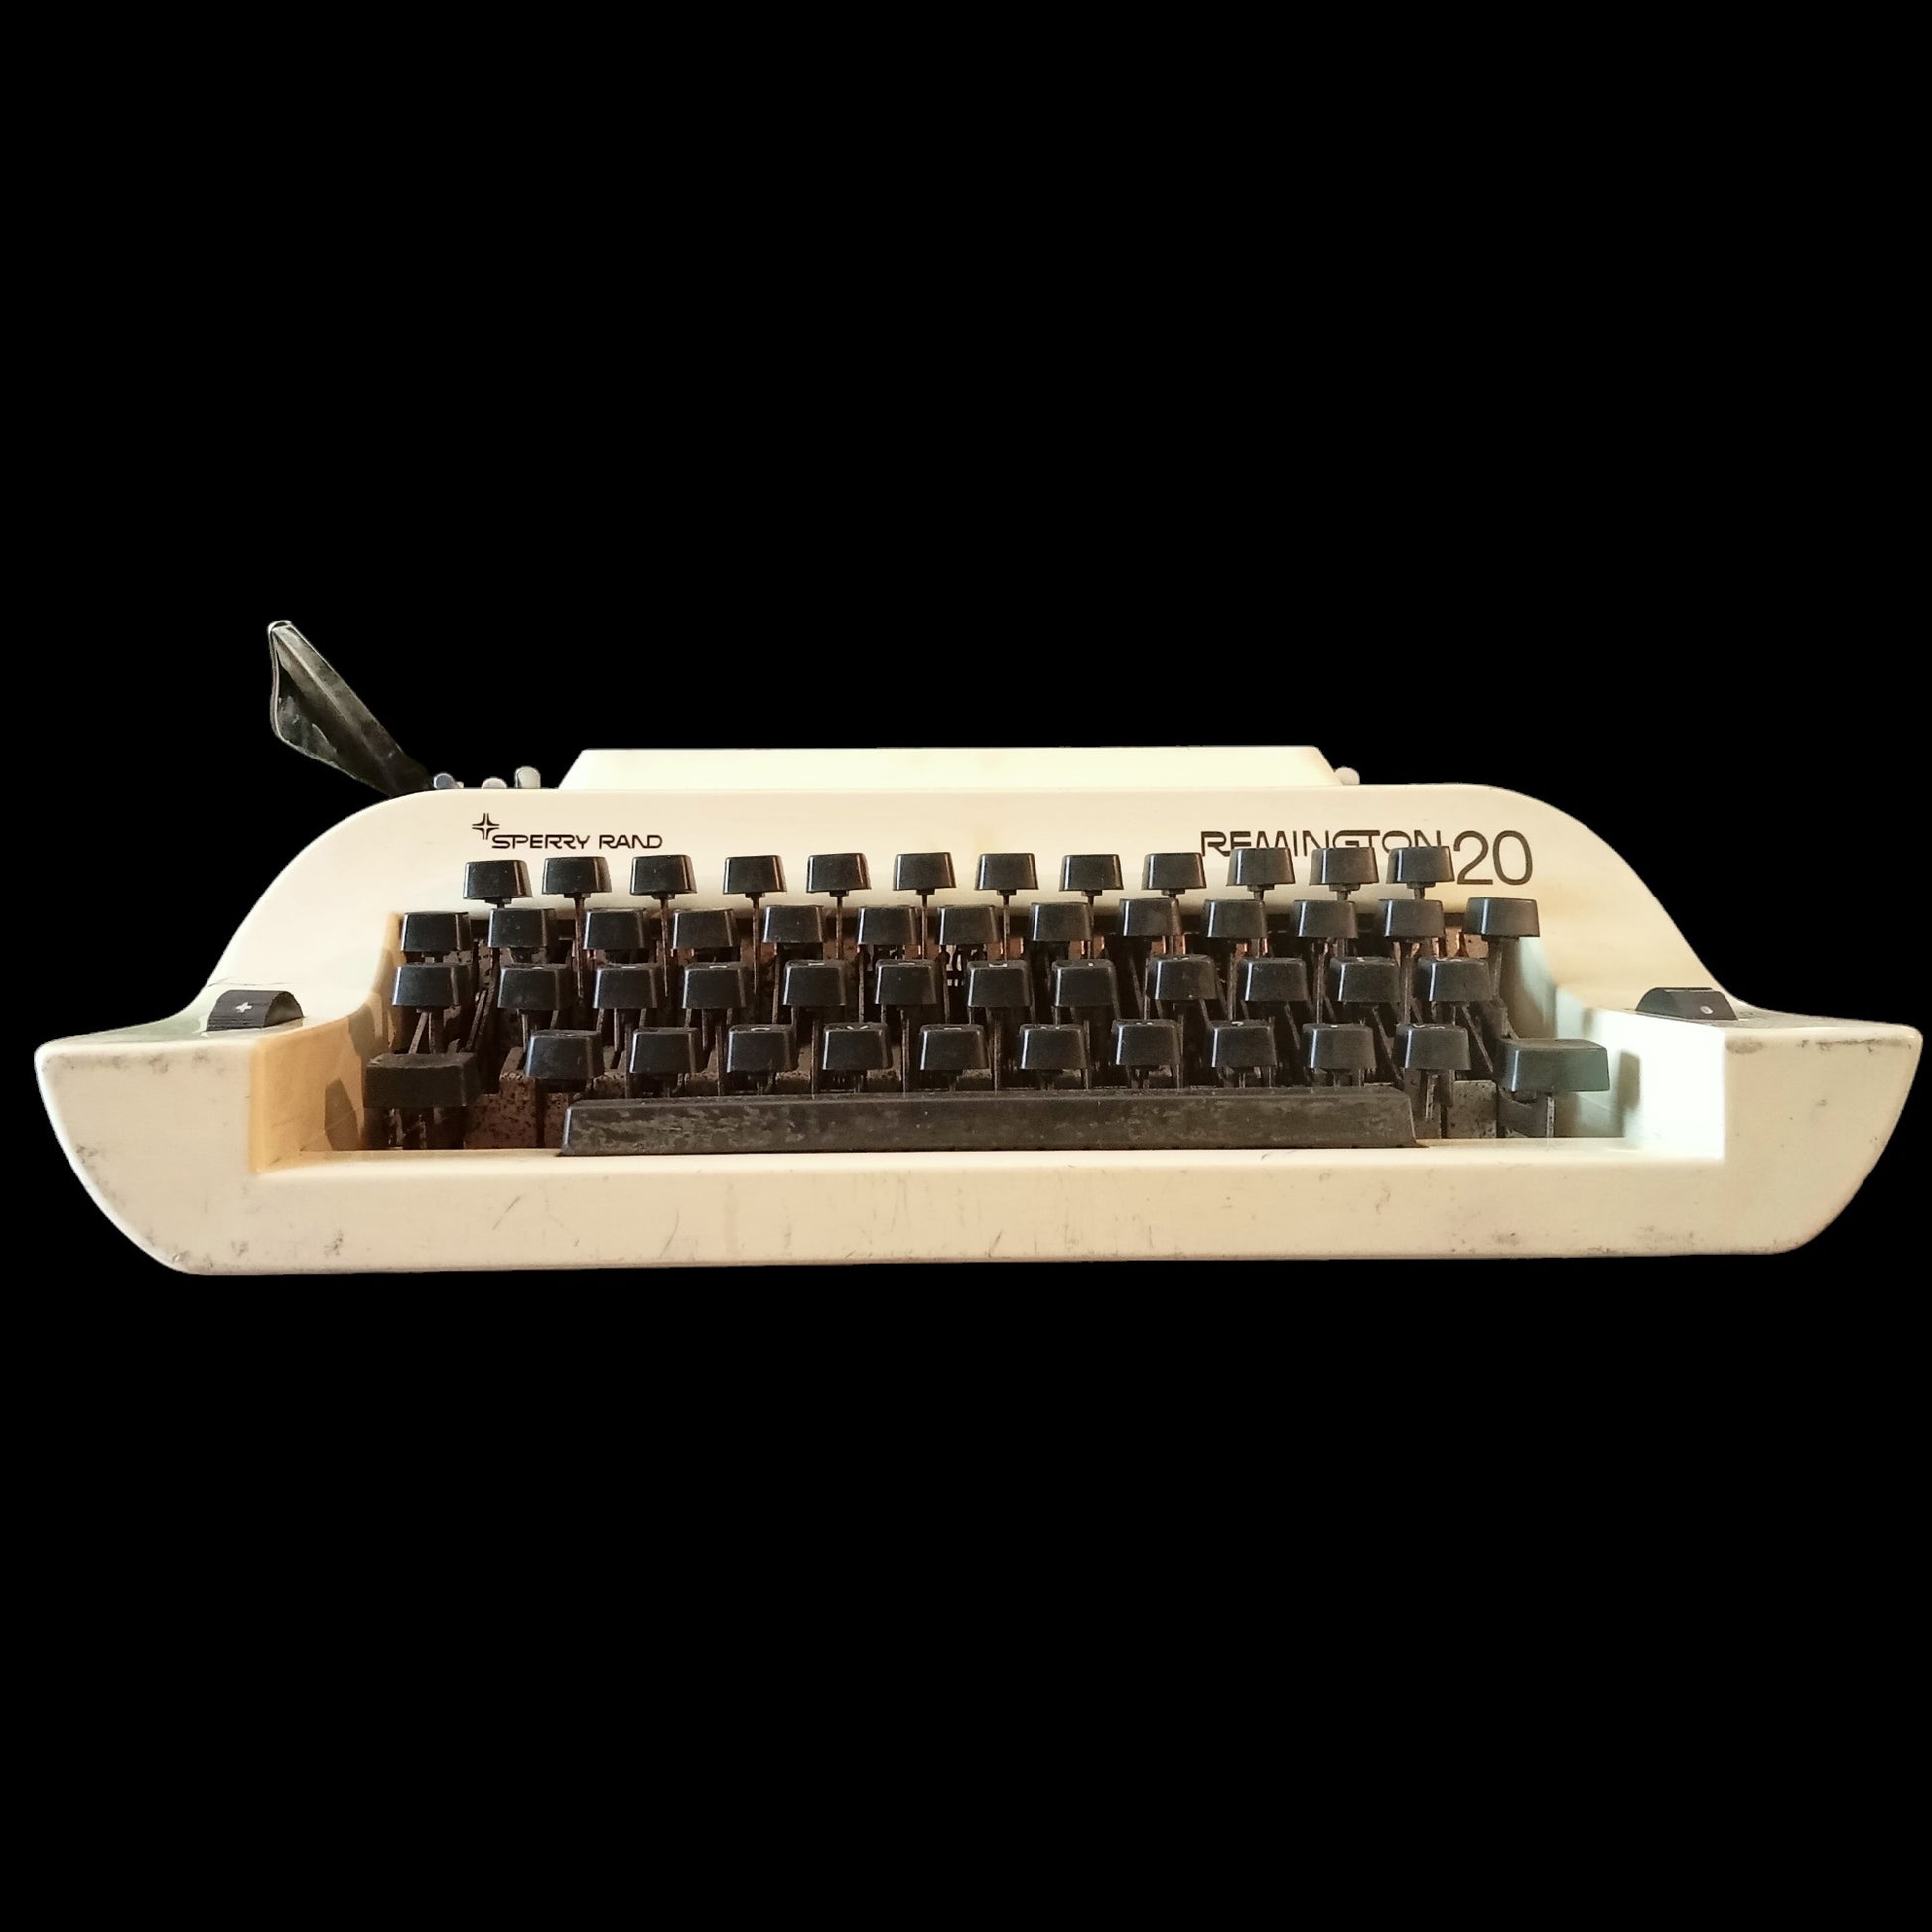 Image of Remington 20 Typewriter. Available from universaltypewritercompany.in